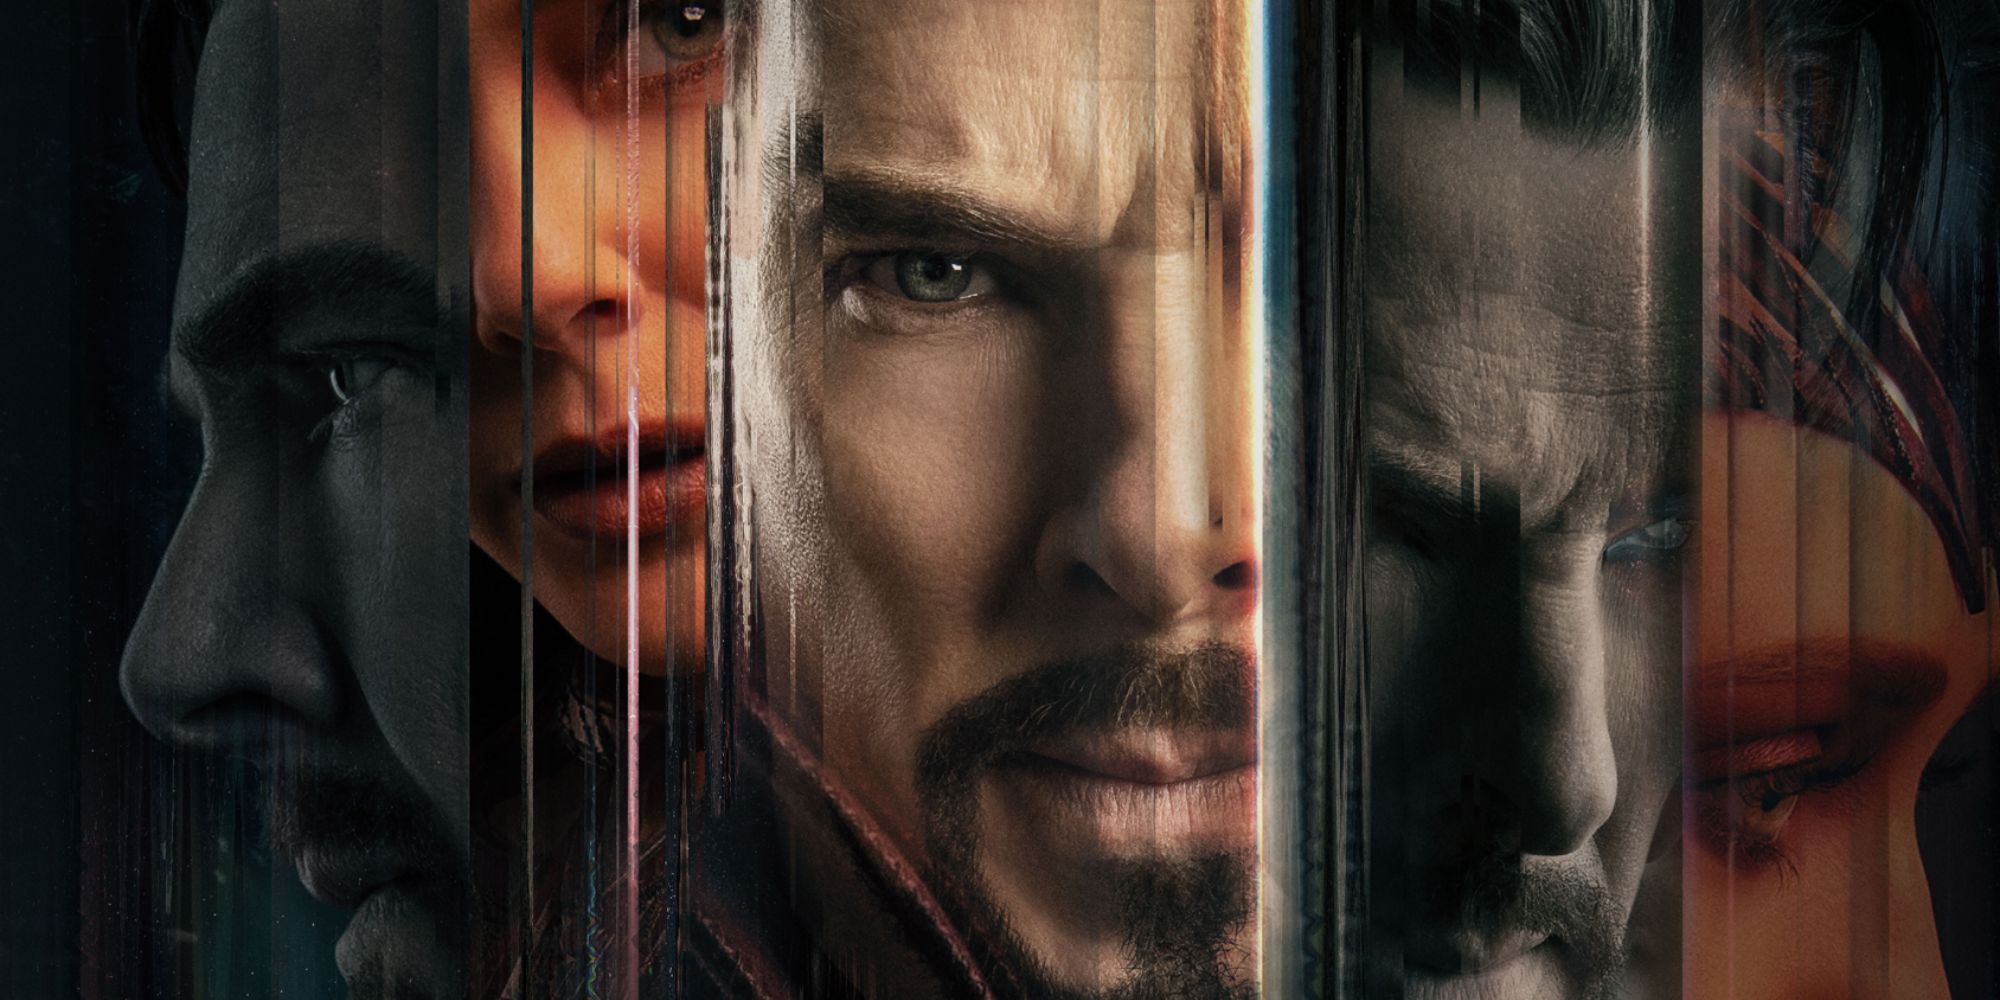 Doctor Strange Multiverse of Madness poster featuring Benedict Cumberbatch and Elizabeth Olsen